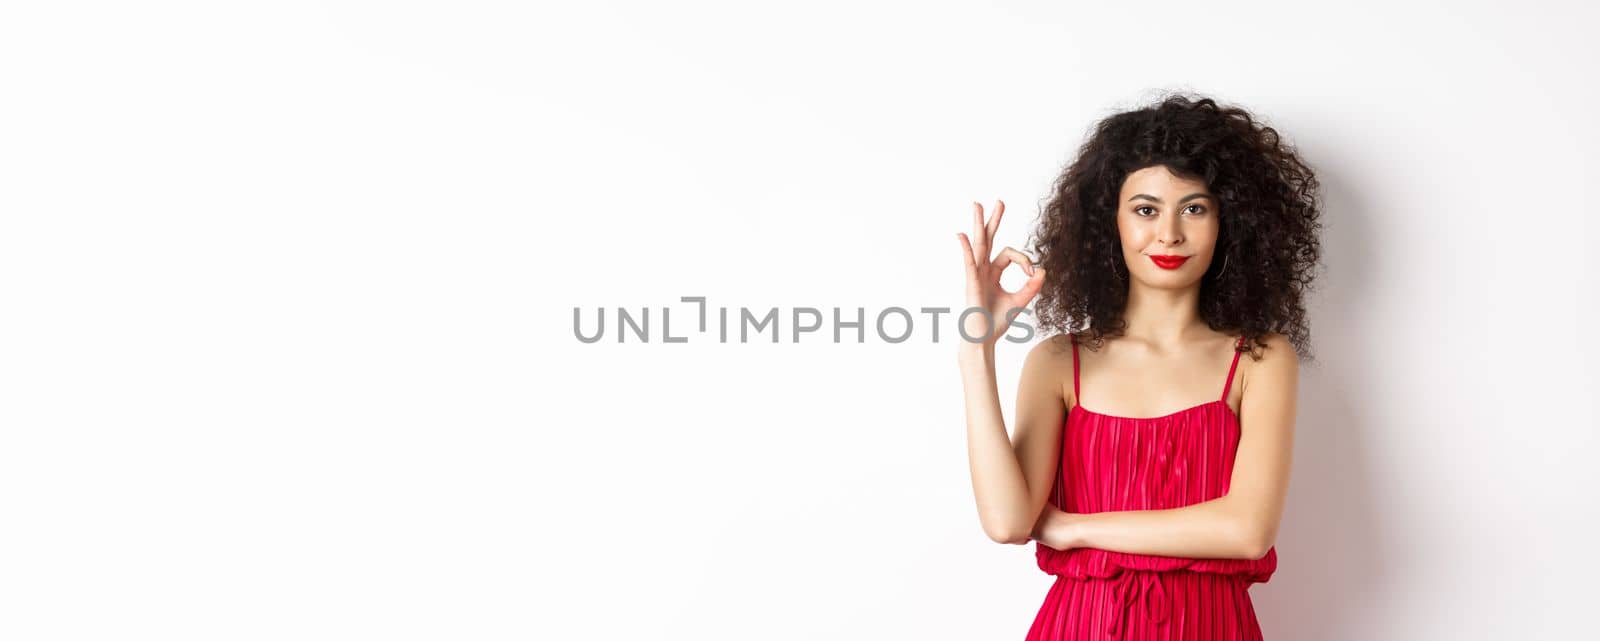 Beautiful assertive woman with curly hairstyle and makeup, wearing red dress, showing okay sign and smiling in approval, say yes, standing on white background.